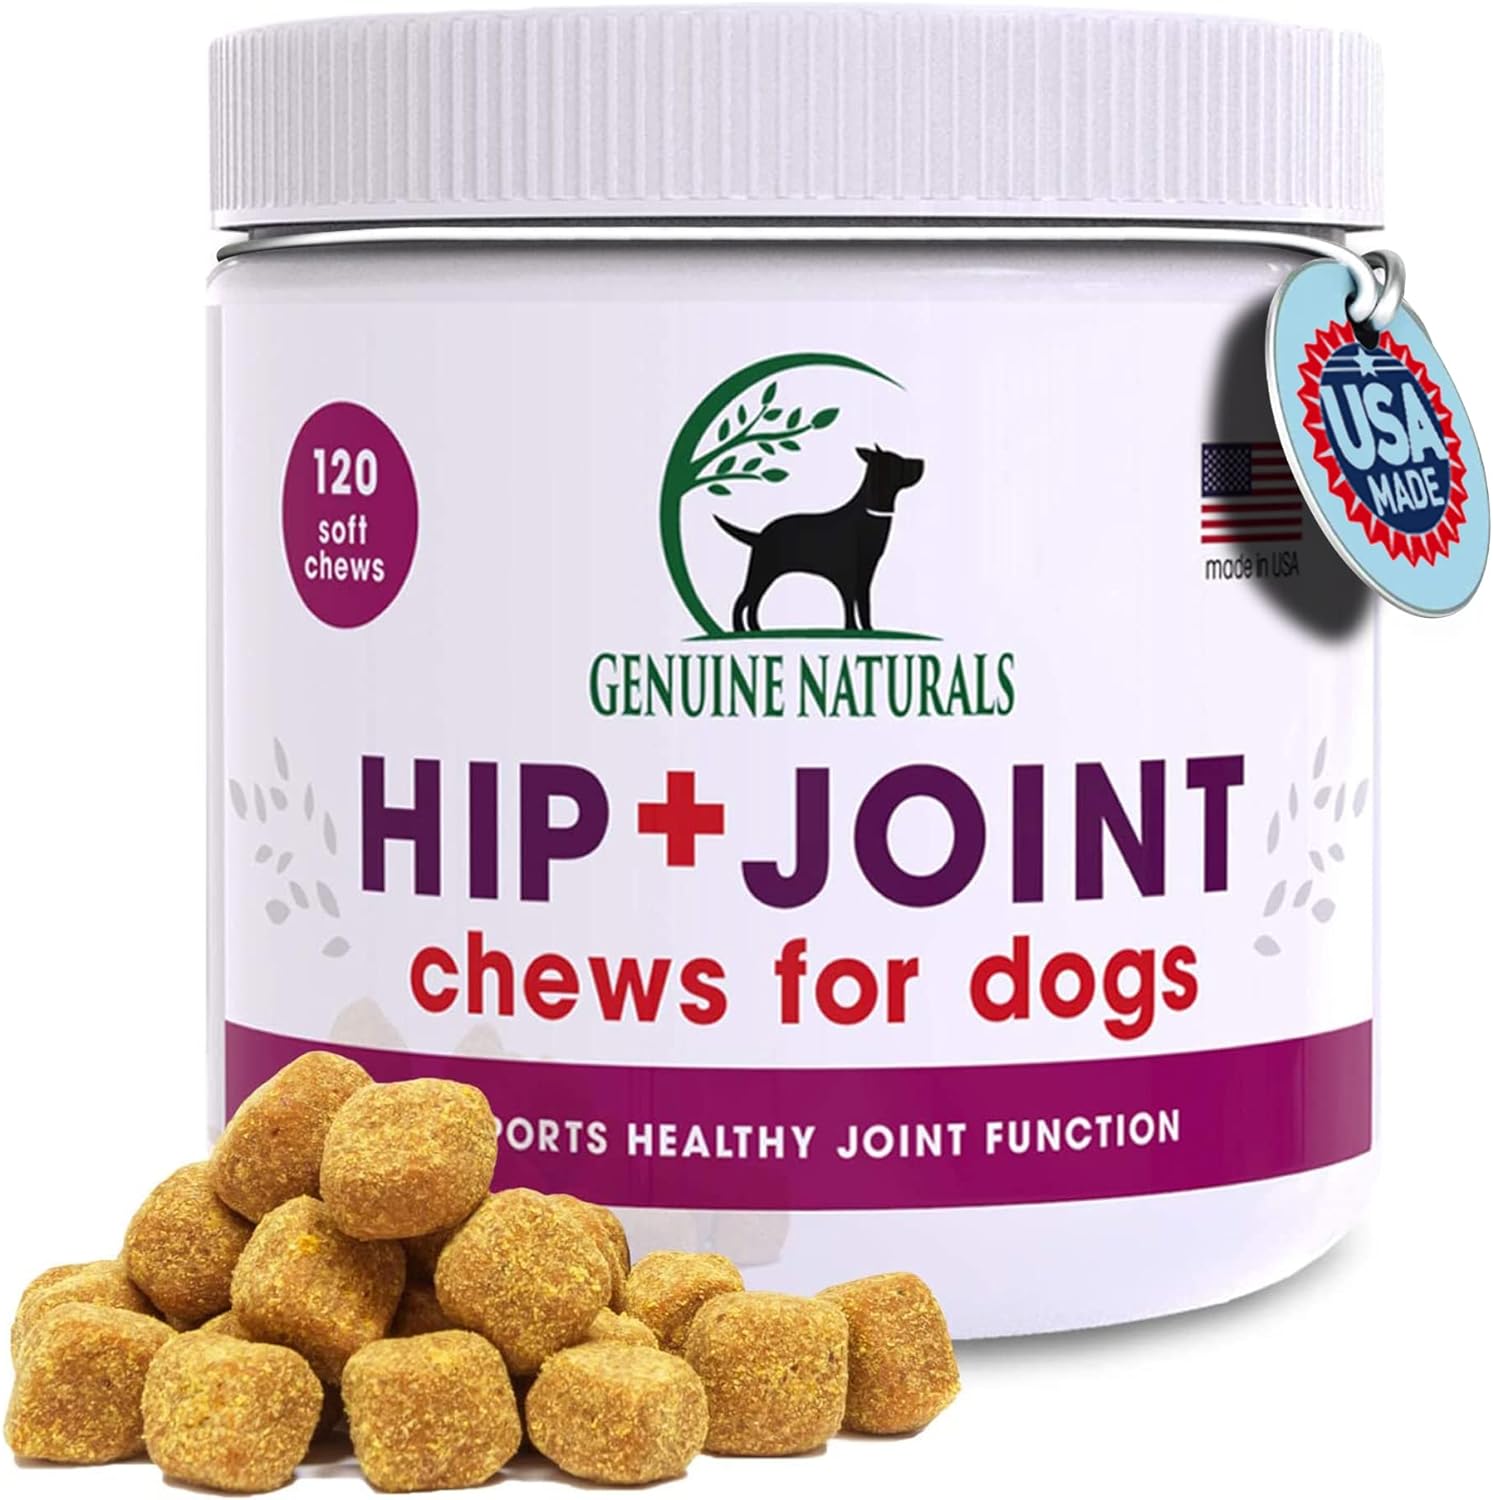 Hip and Joint Supplement for Dogs - Glucosamine Chondroitin, MSM, Organic Turmeric Soft Chews, Dog Vitamins, Supports Healthy Joint Function and Helps with Pain Relief,120 Count